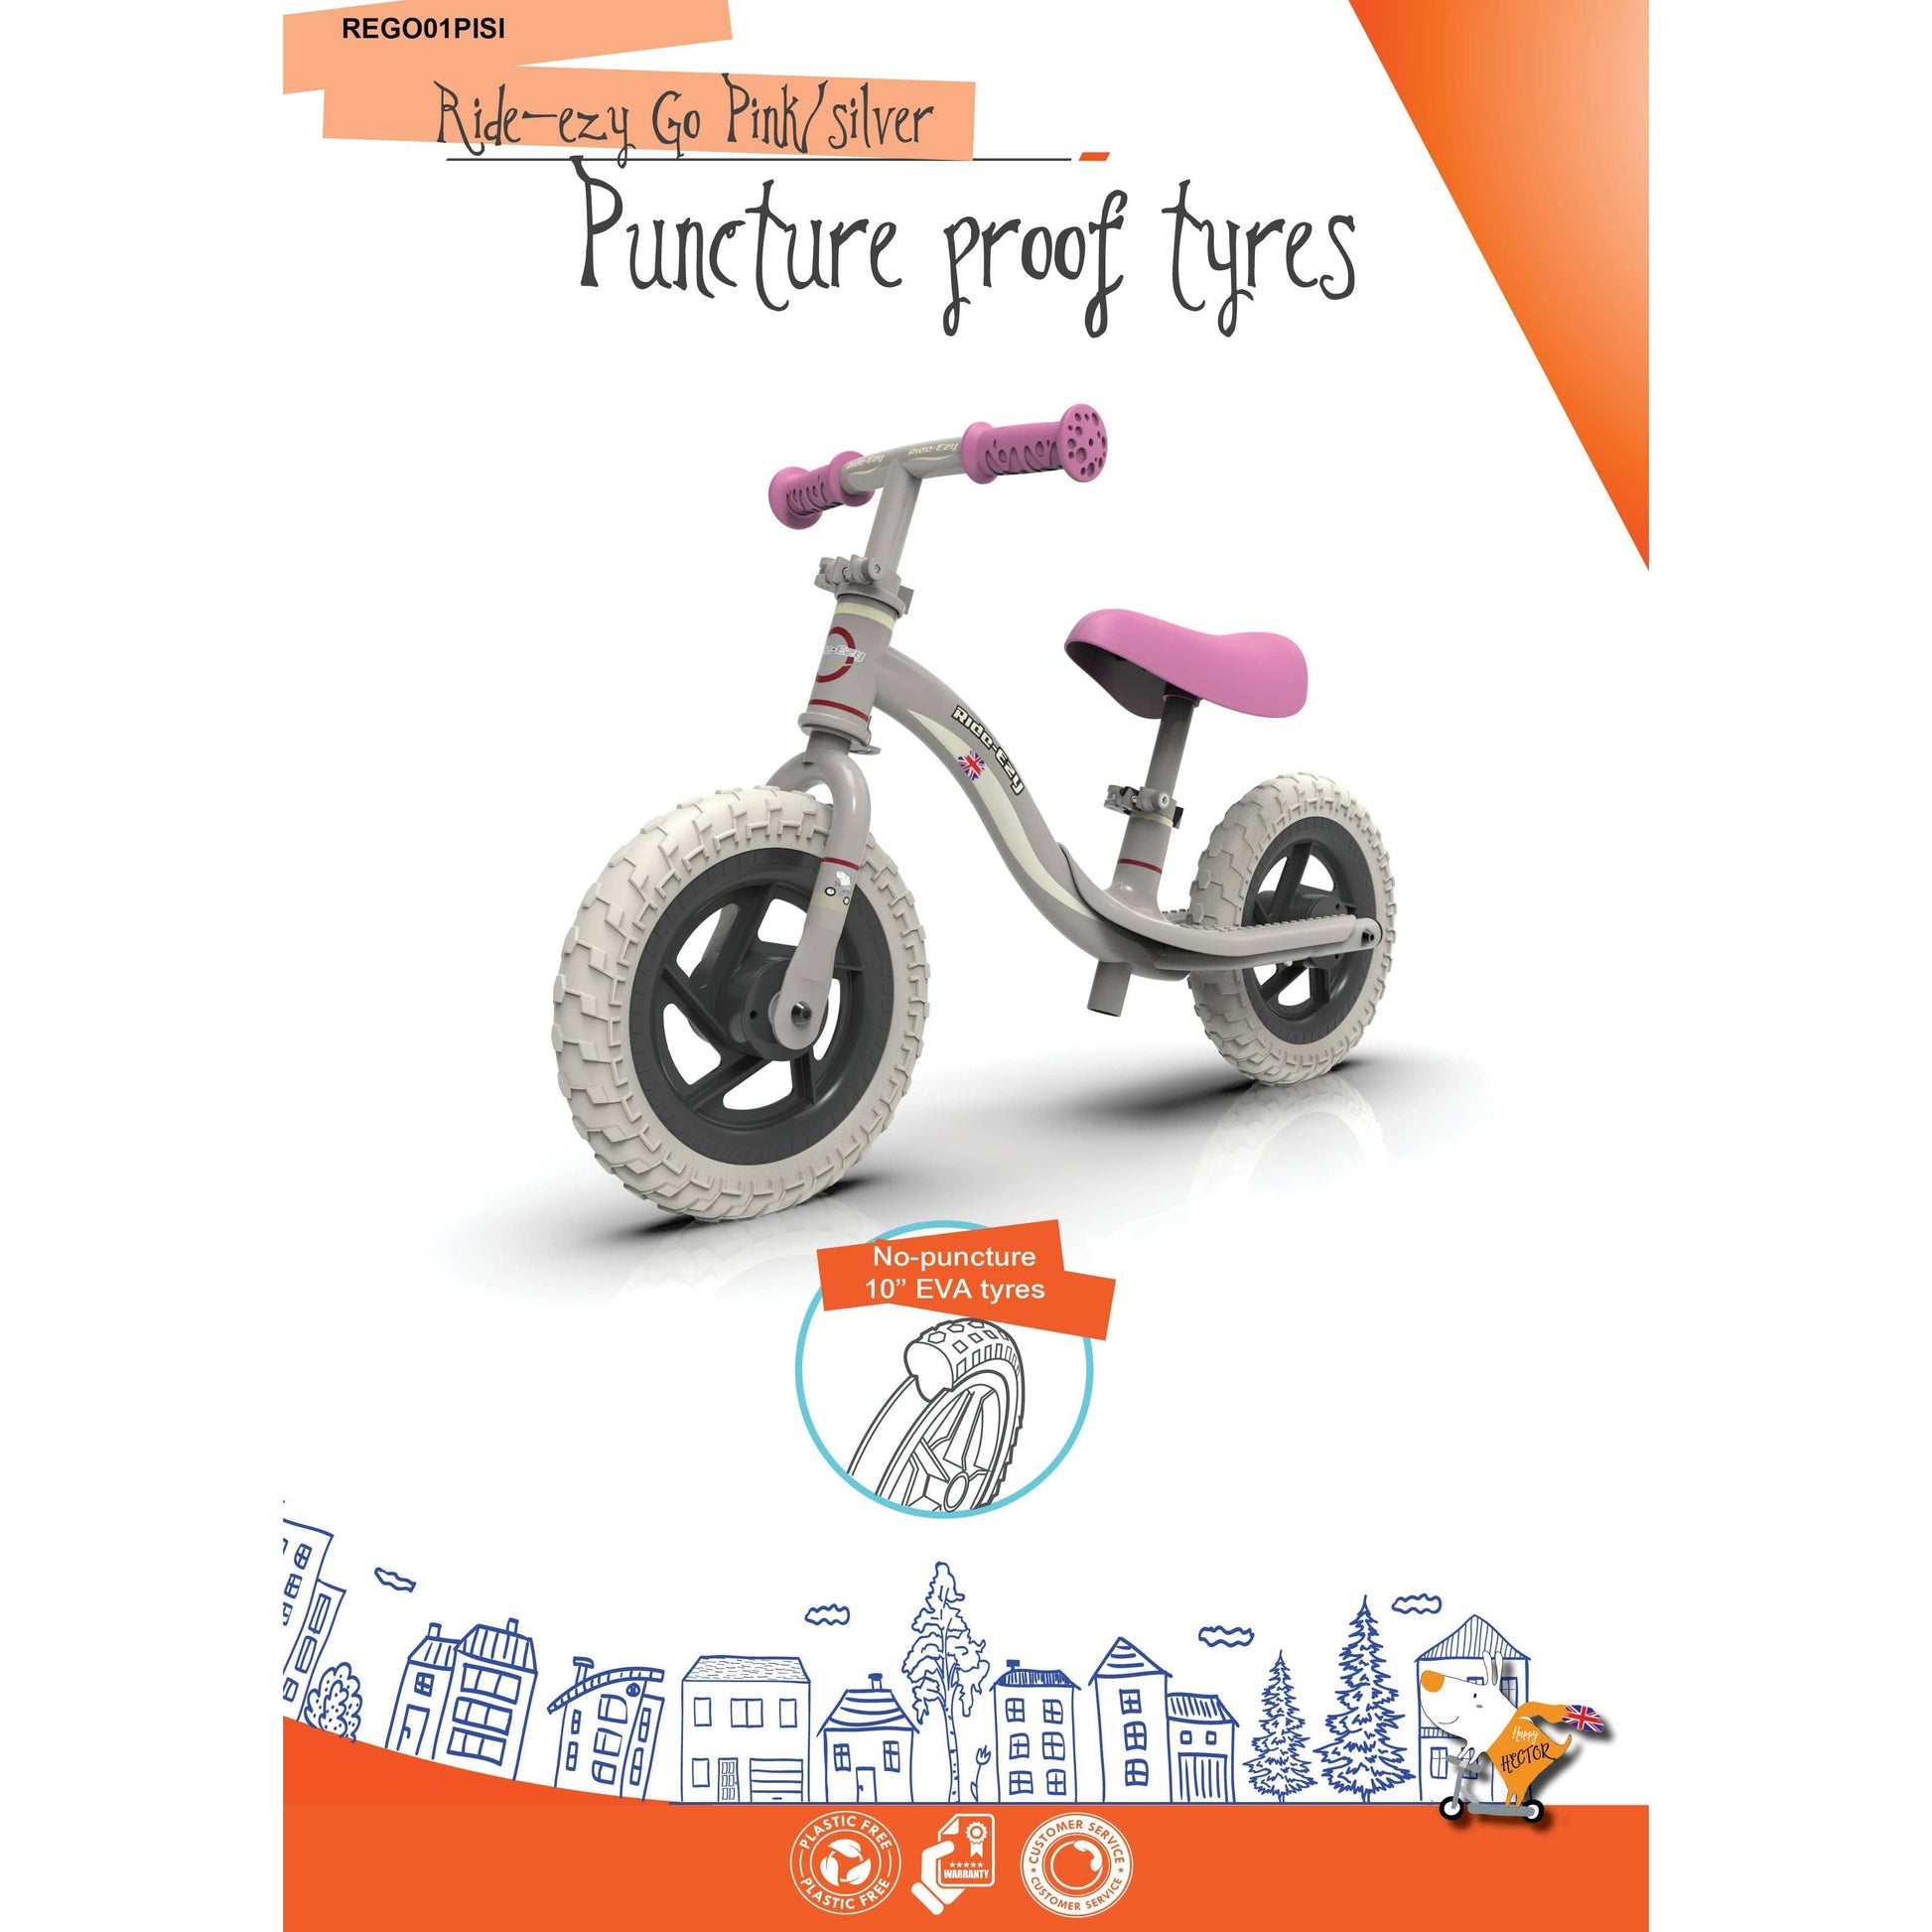 Ride-Ezy Go Balance Bike - Pink & Silver with puncture proof tyres